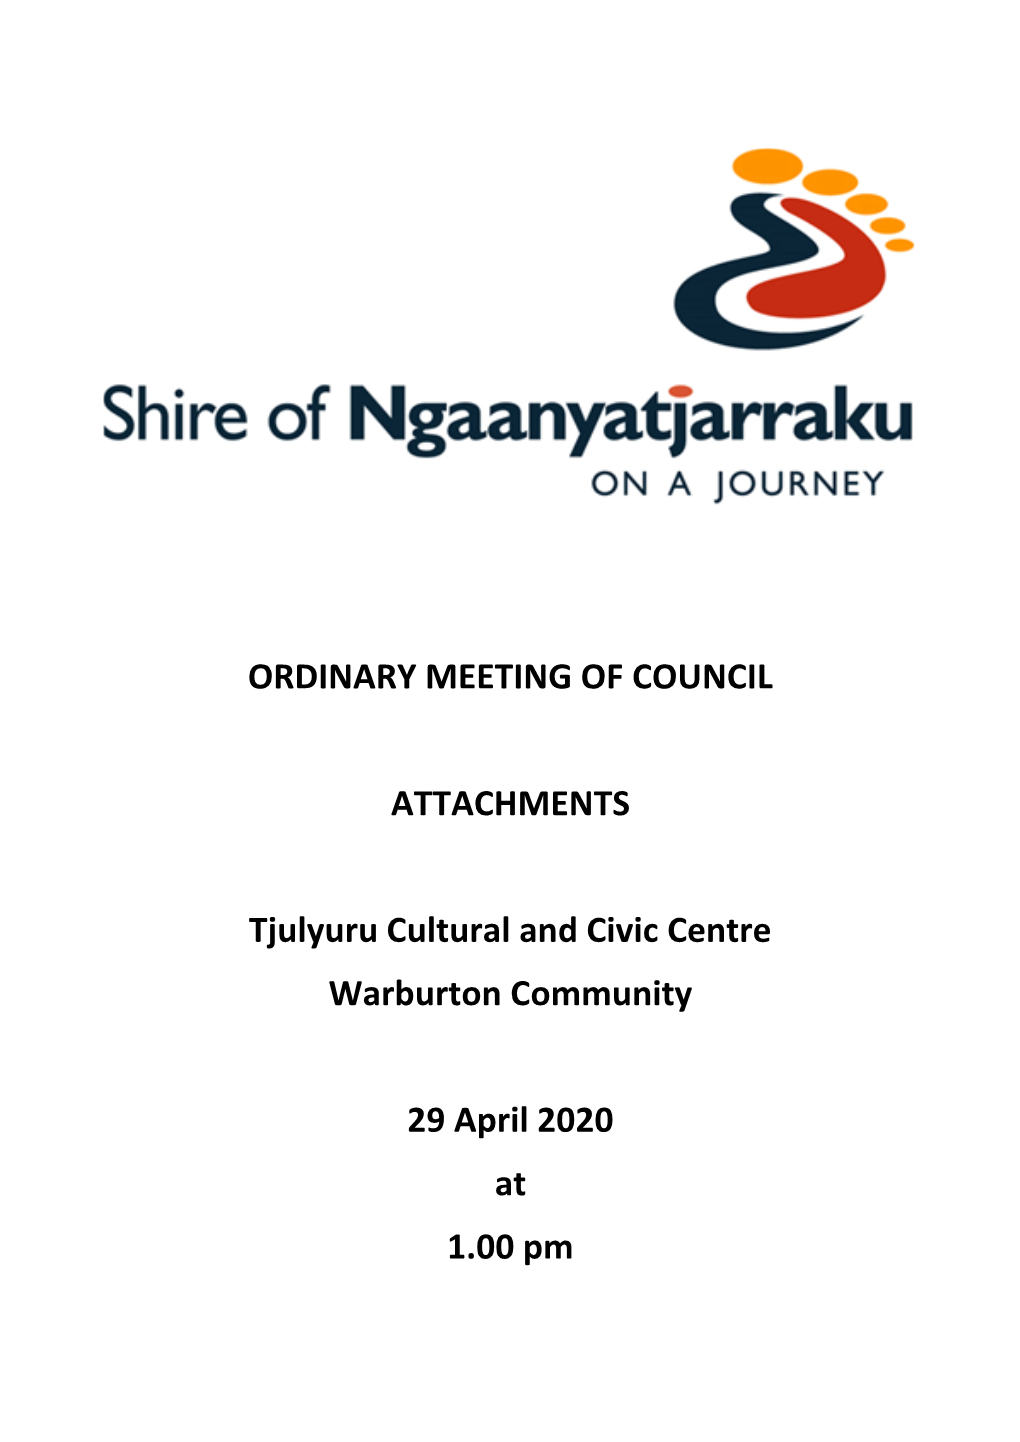 Ordinary Meeting of Council Attachments